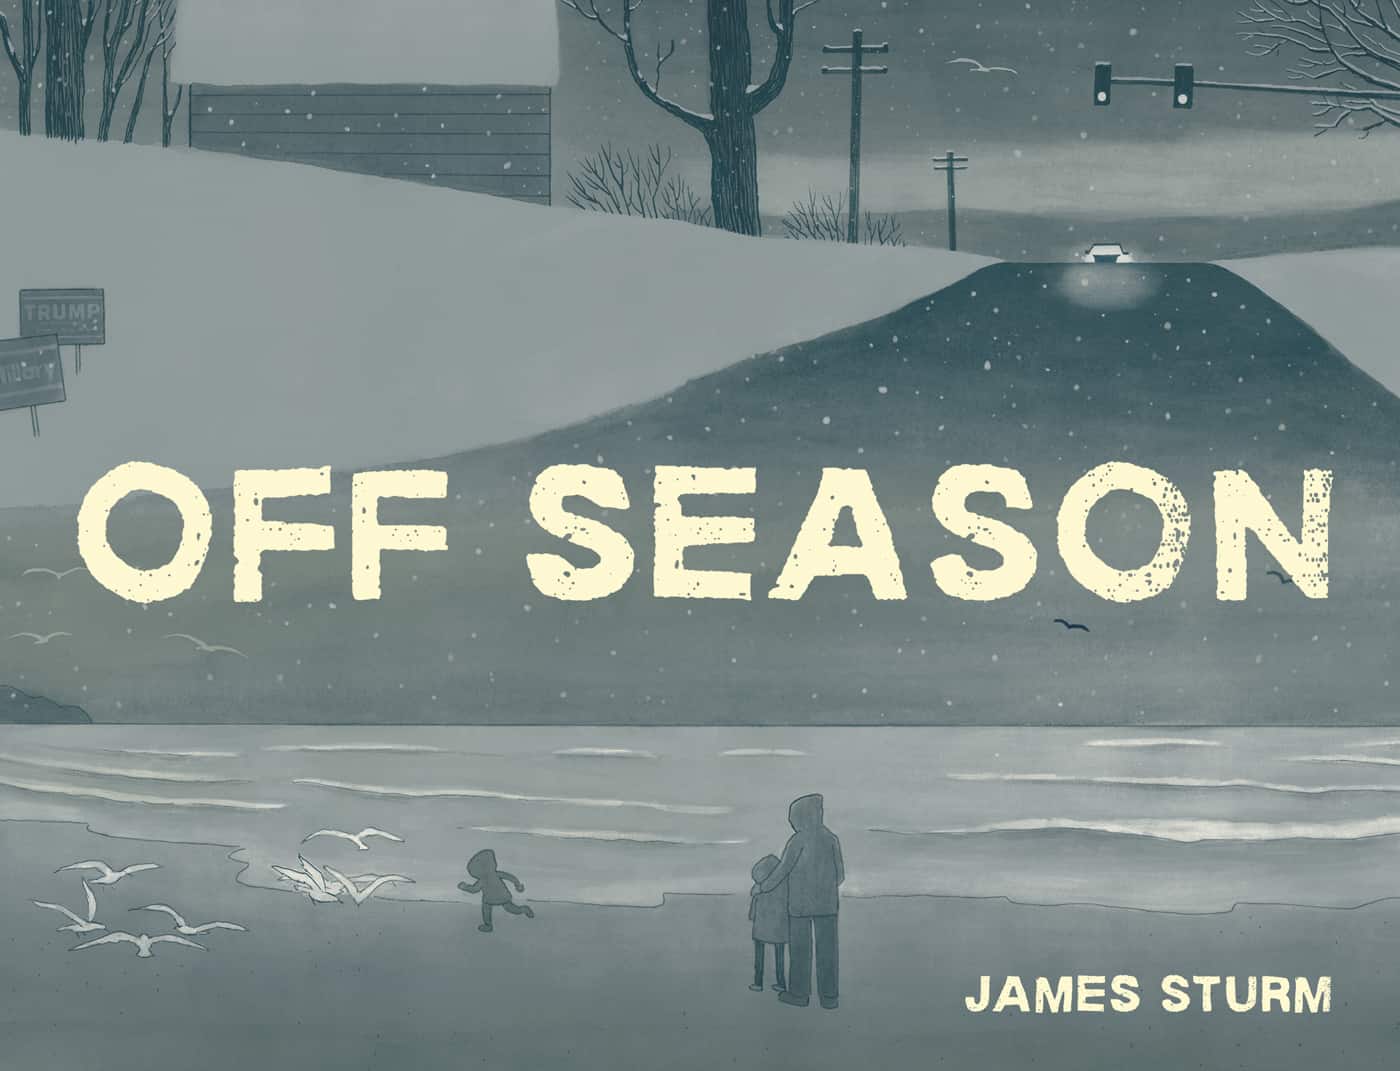 title panel from Off Season by James Sturm